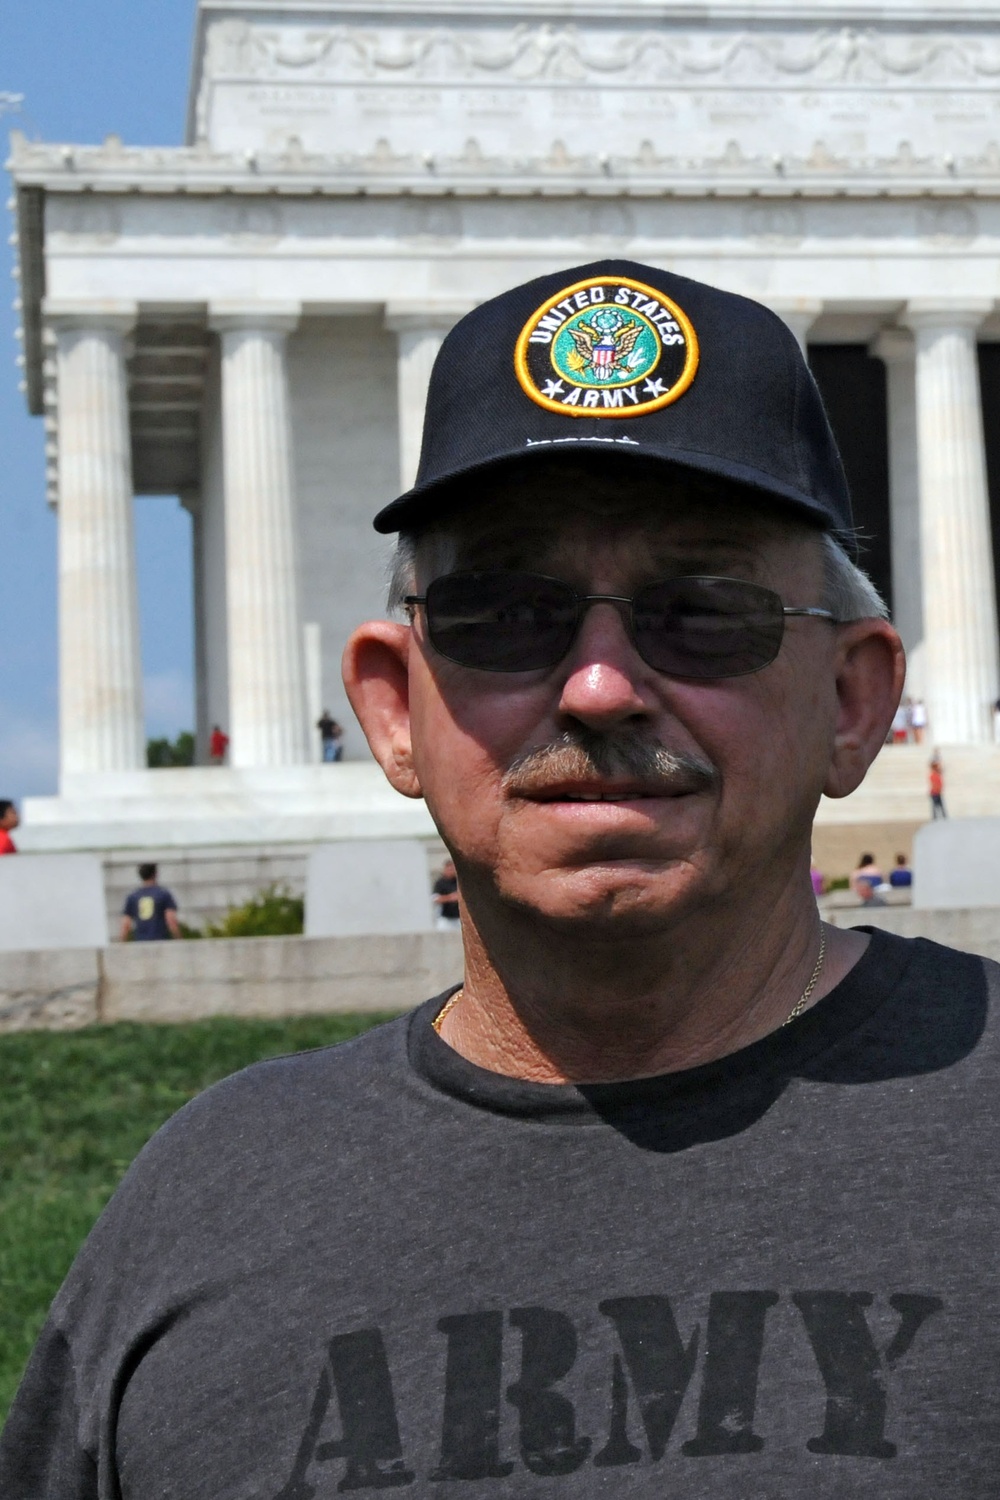 Veterans' Reflections: A Responsibility Never to Forget